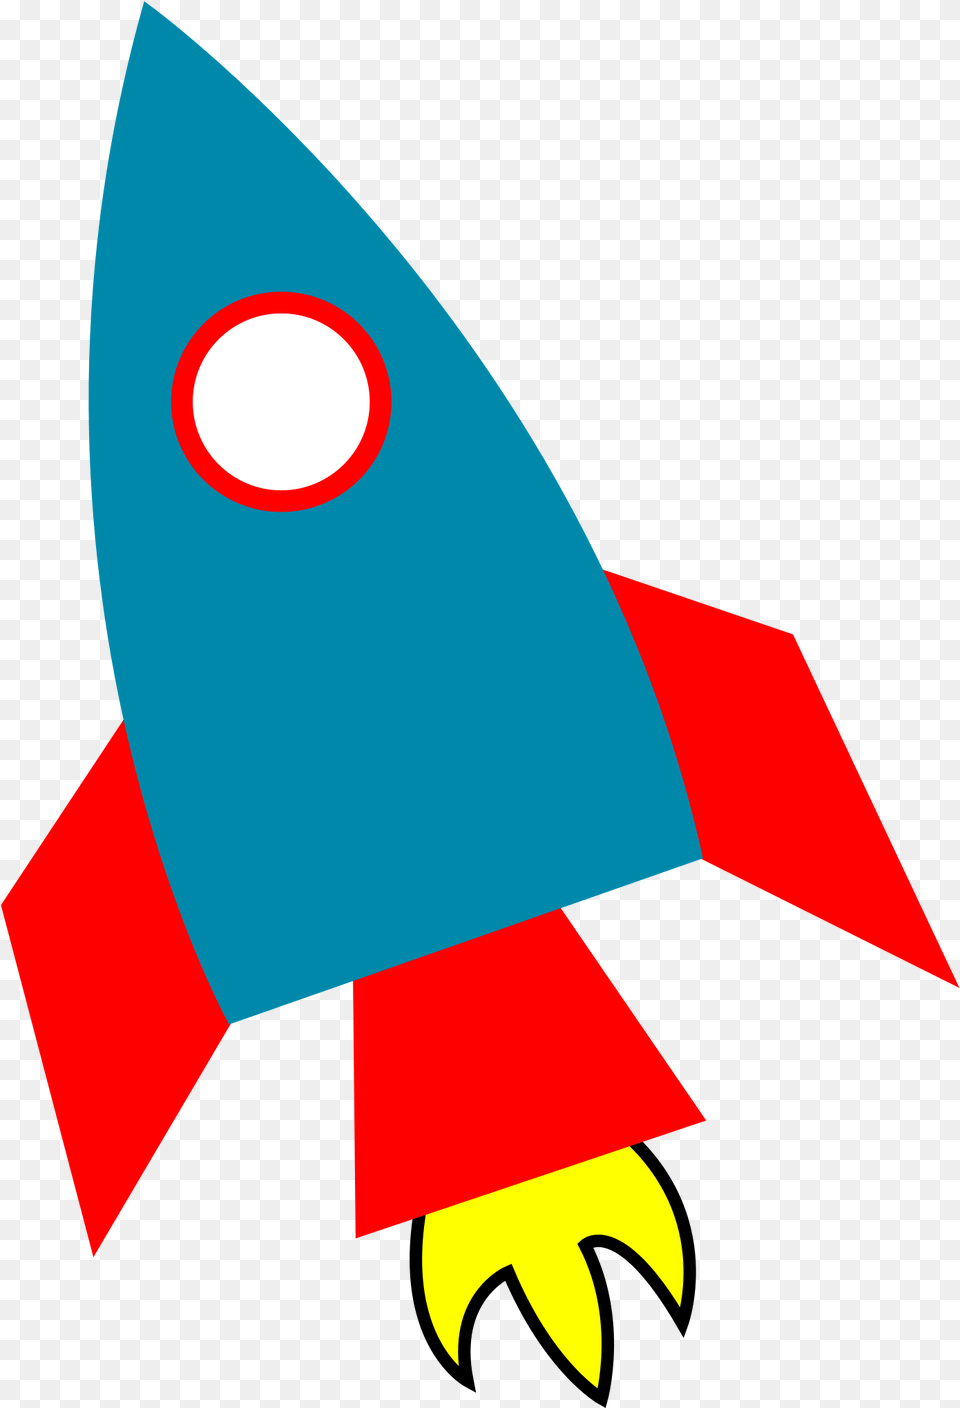 Space Rocket Clipart Widescreen 2 Hd Wallpapers Rocketship Clipart Free Png Download